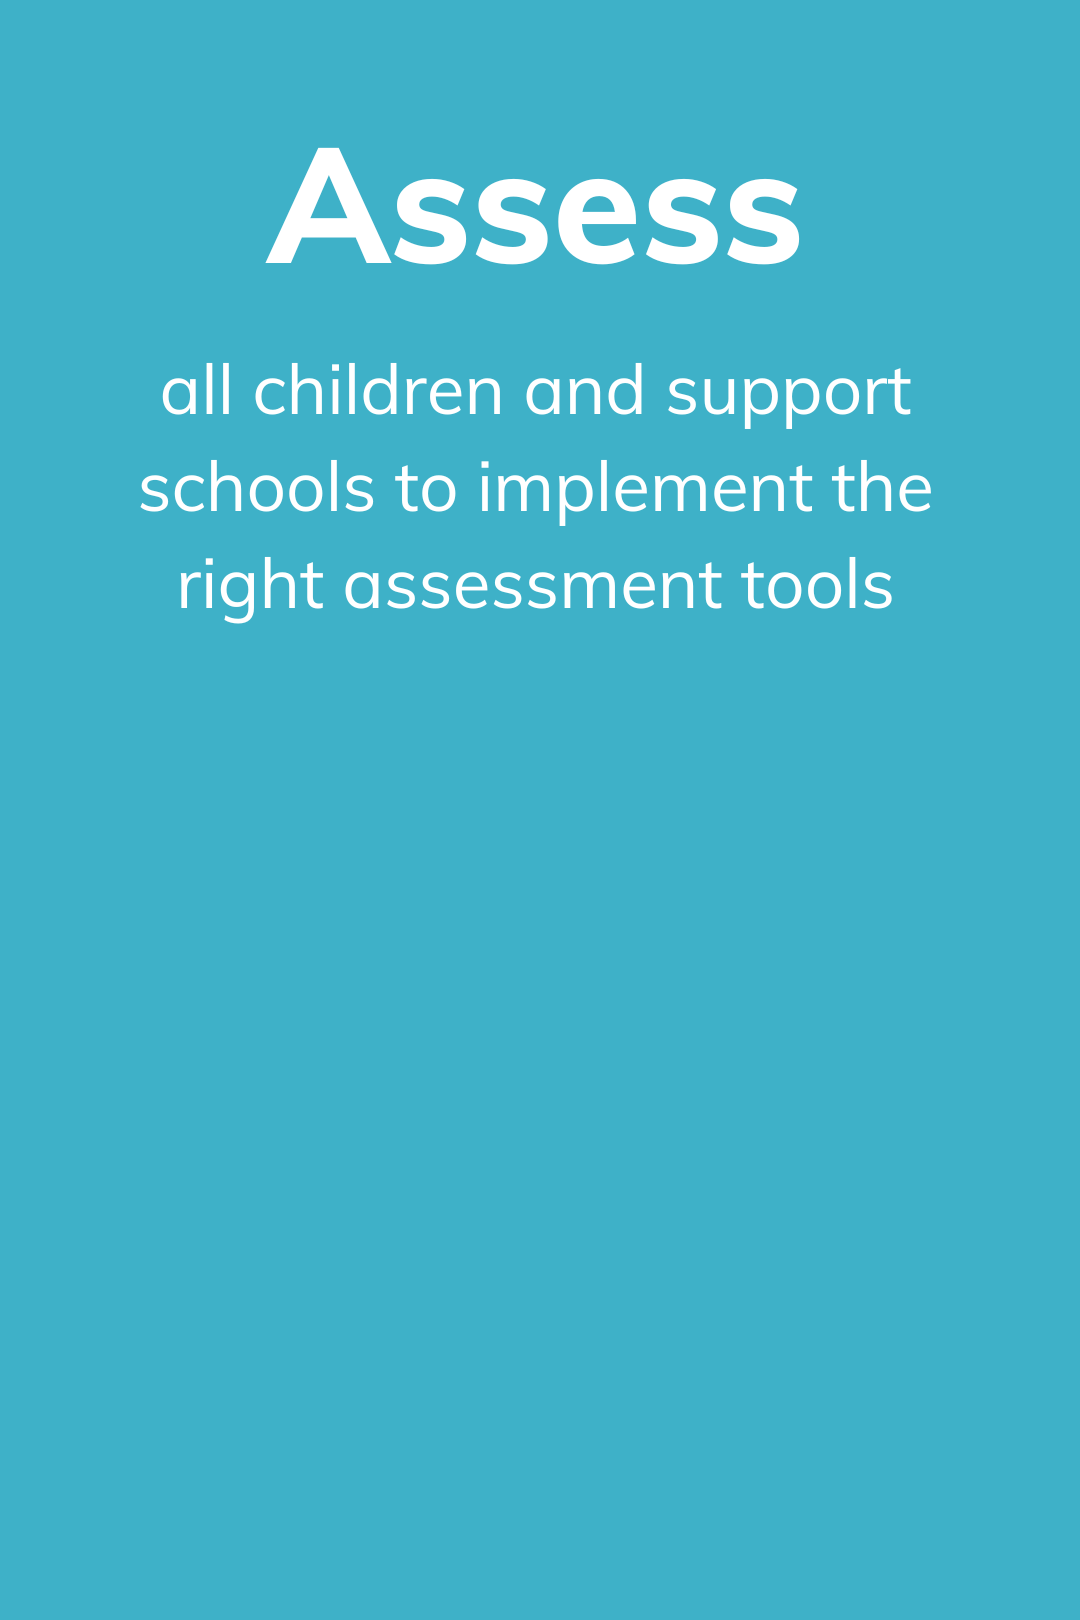 Assess All schools should be required, and properly supported, to regularly assess all children’s SEMH needs in order to track progress and better tailor support. (1080 x 1620 px)